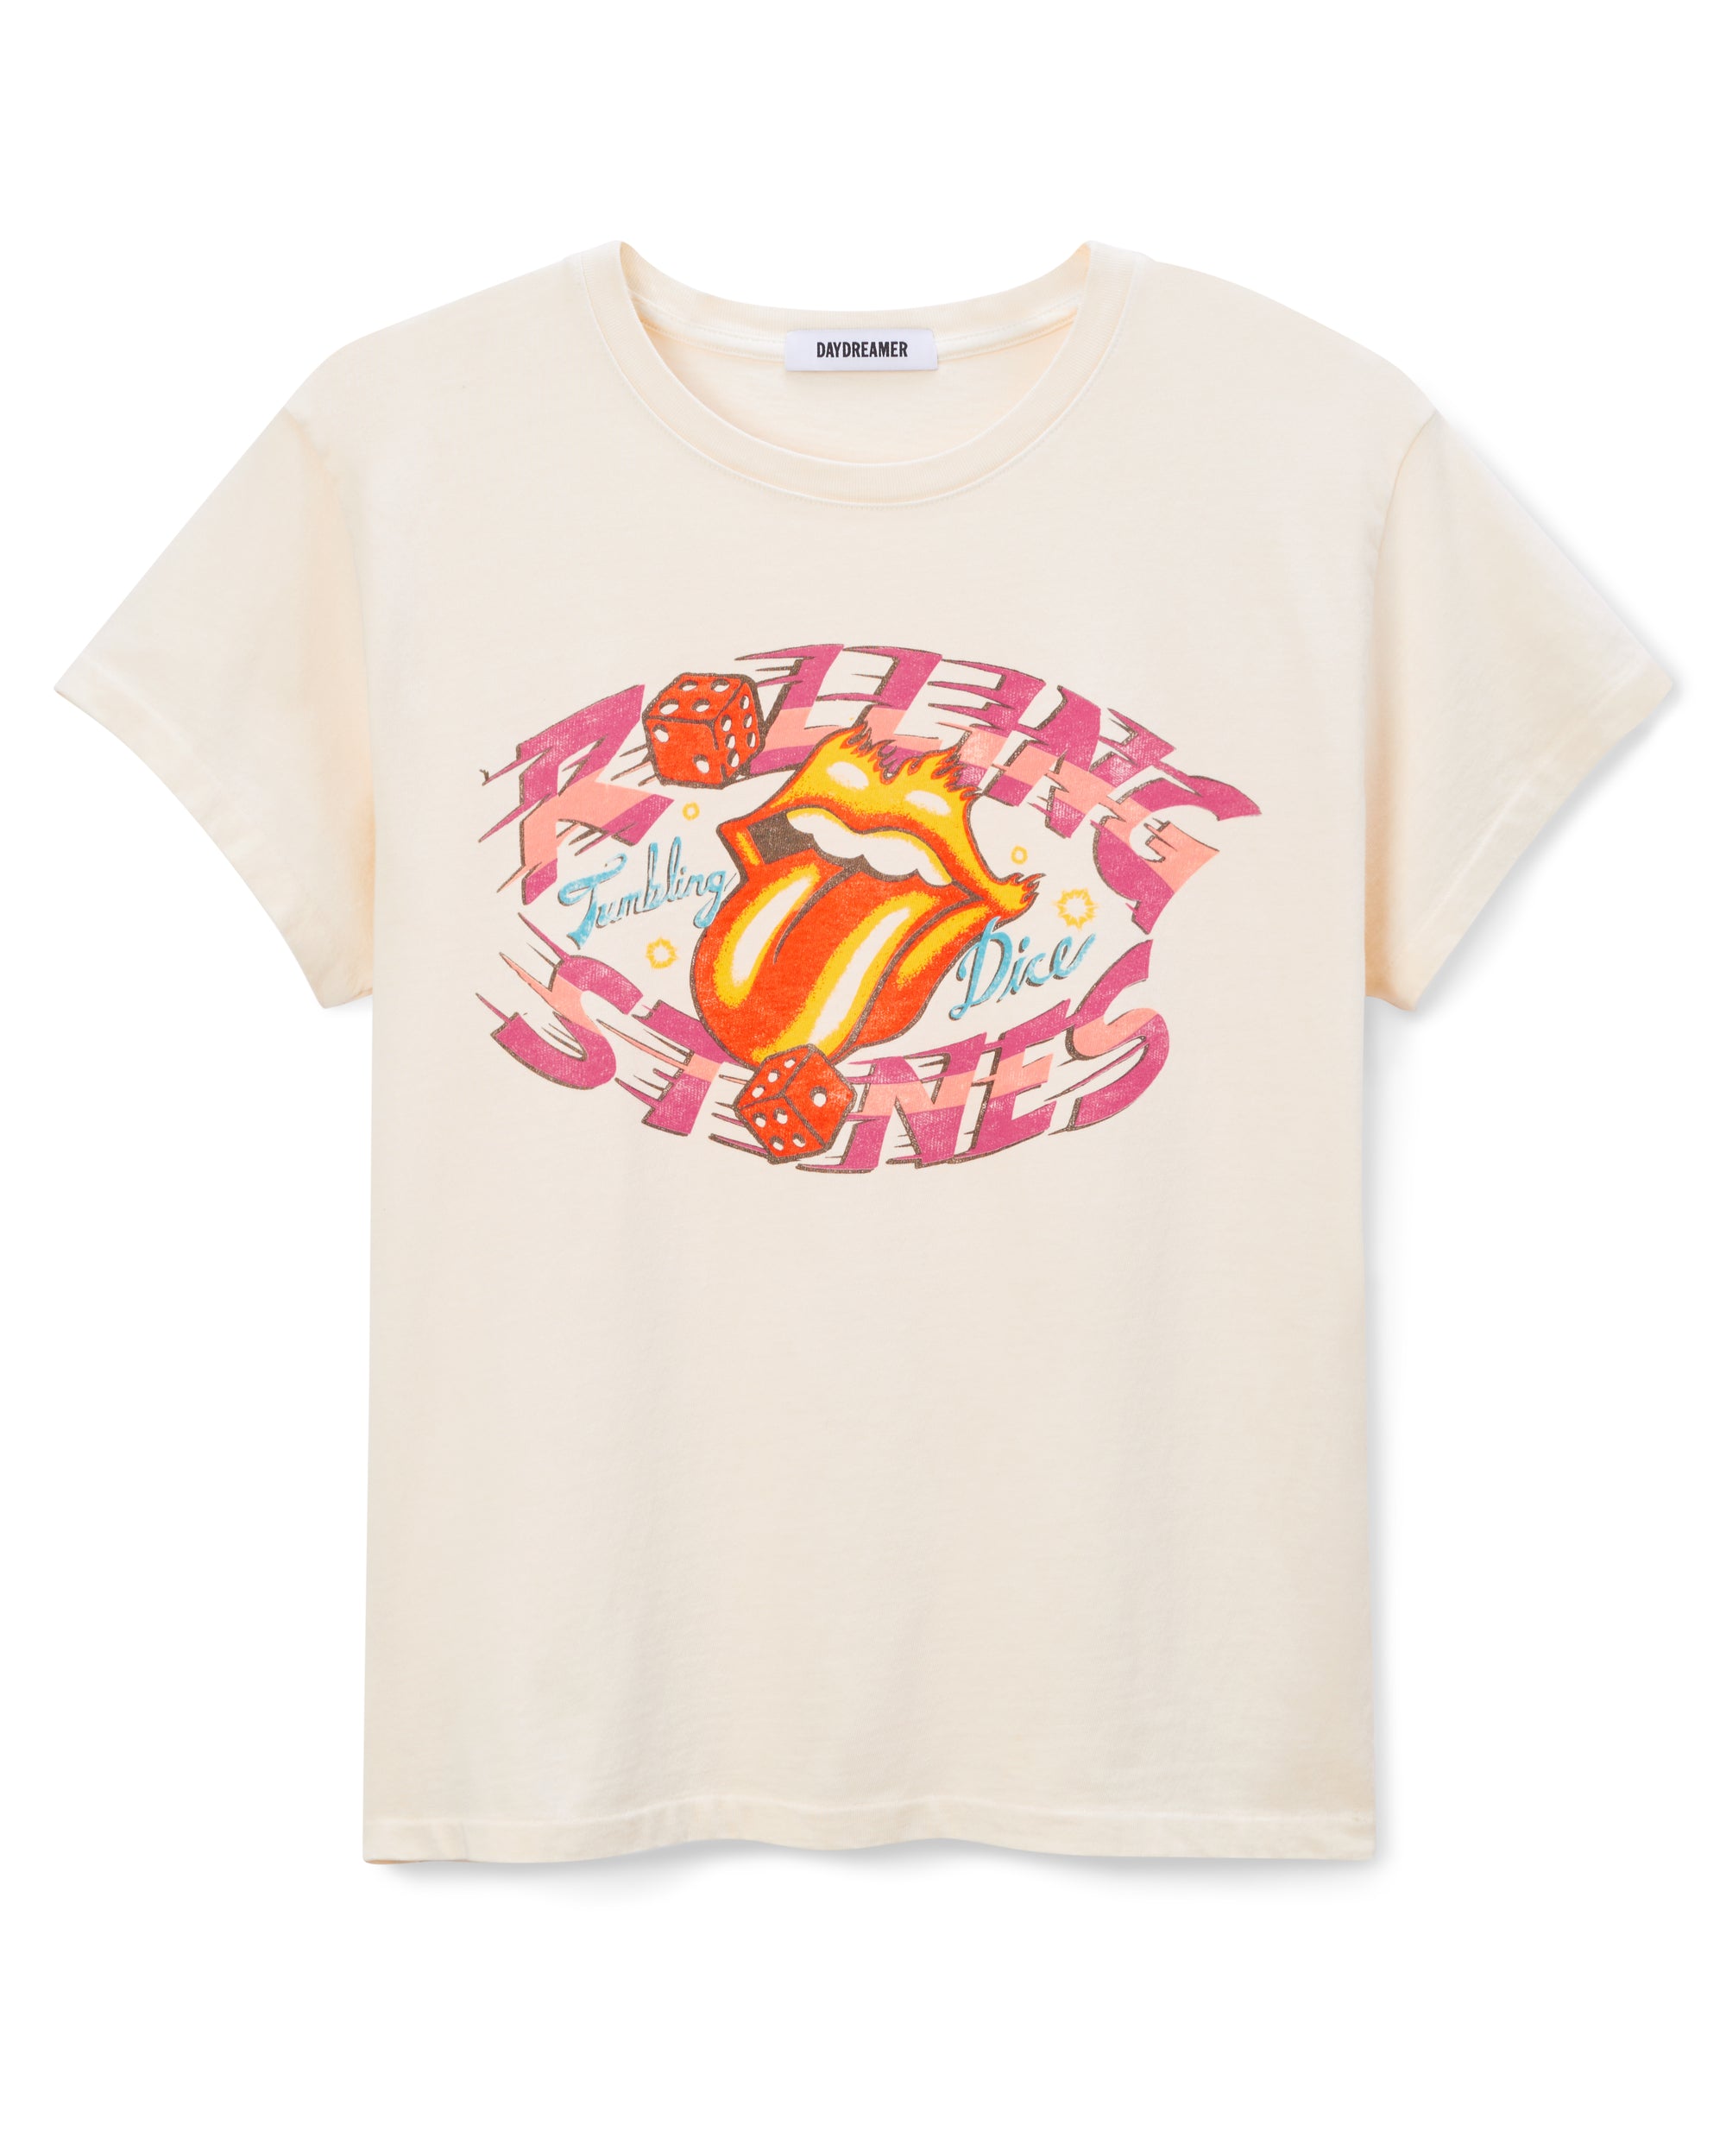 DAYDREAMER Rolling Stones Tumbling Dice Tour Tee